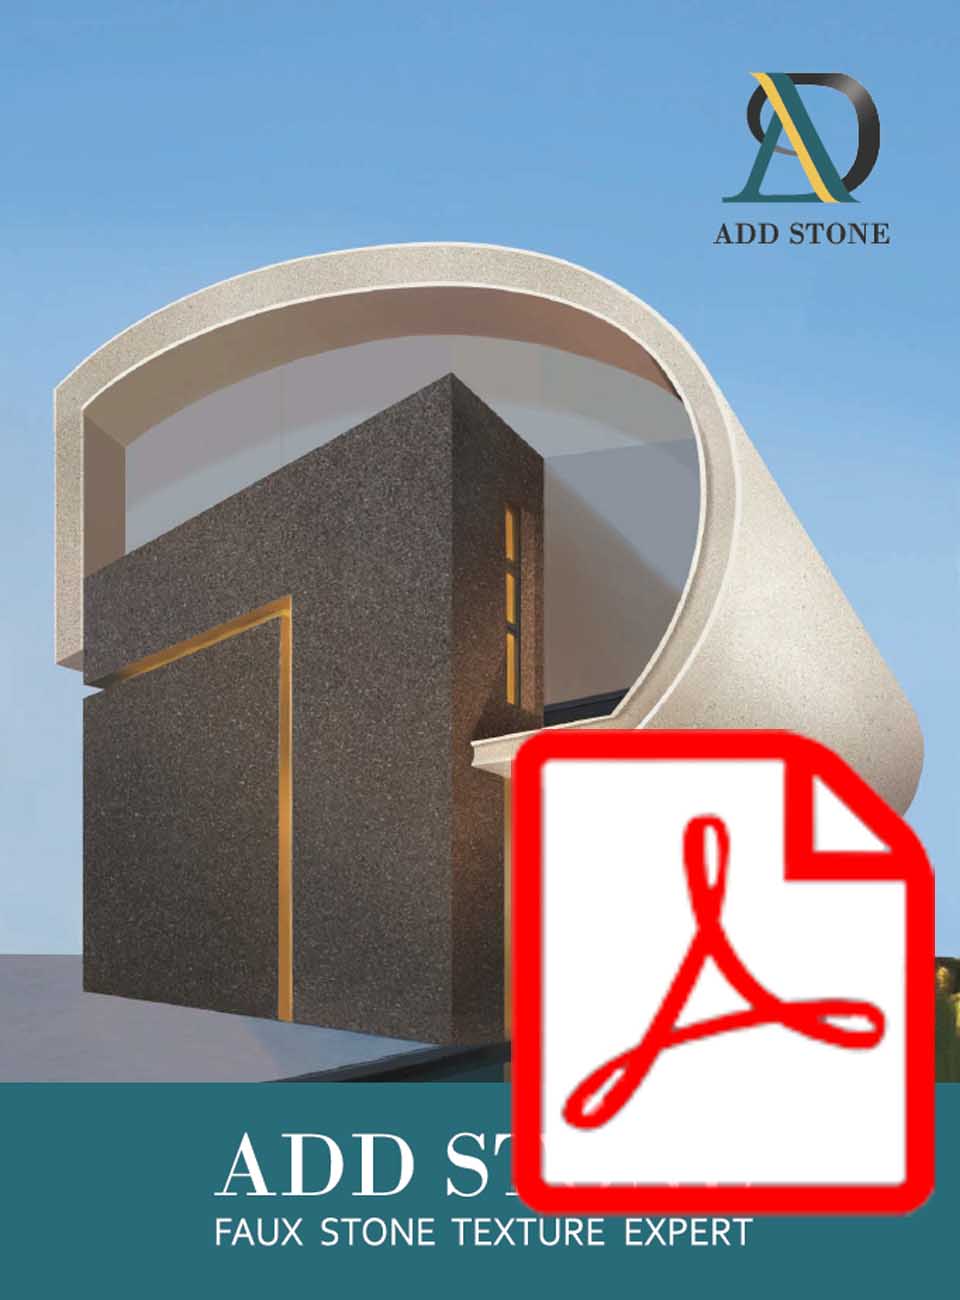 ADDSTONE AN / WAG Faux stone coating Brochure cover